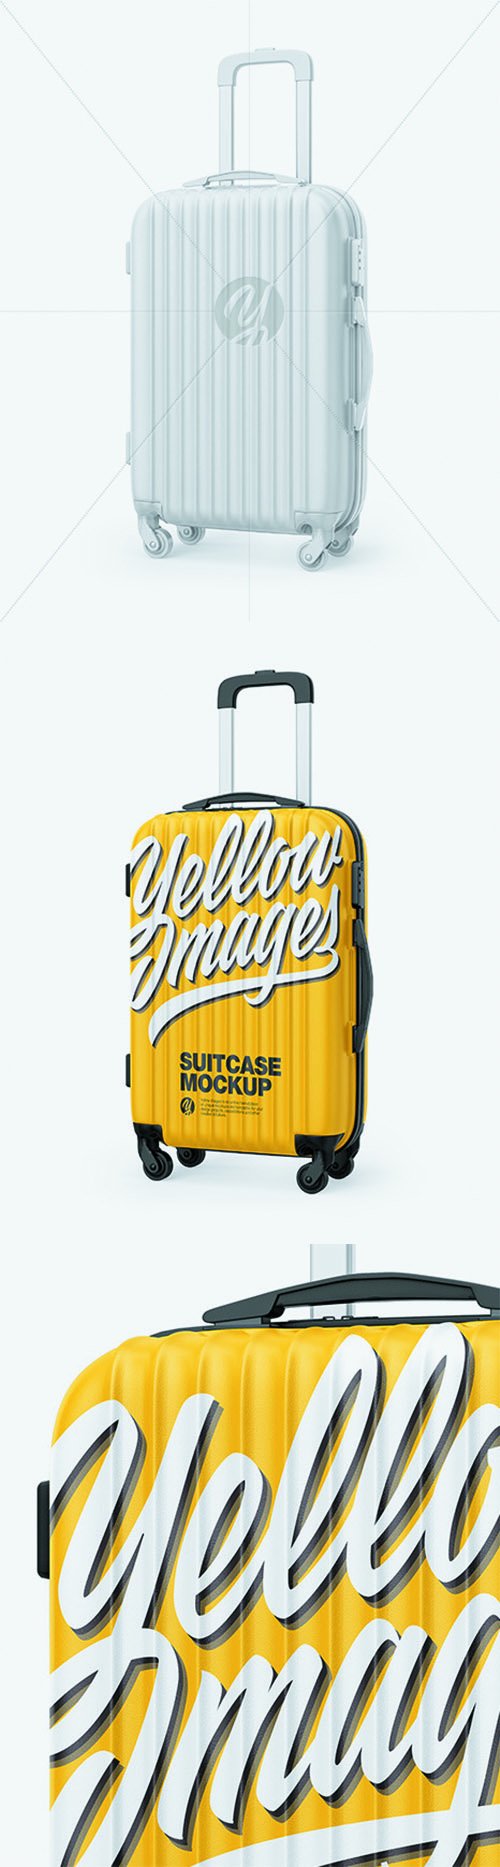 Travel Suitcase Mockup - Half Side View 68868